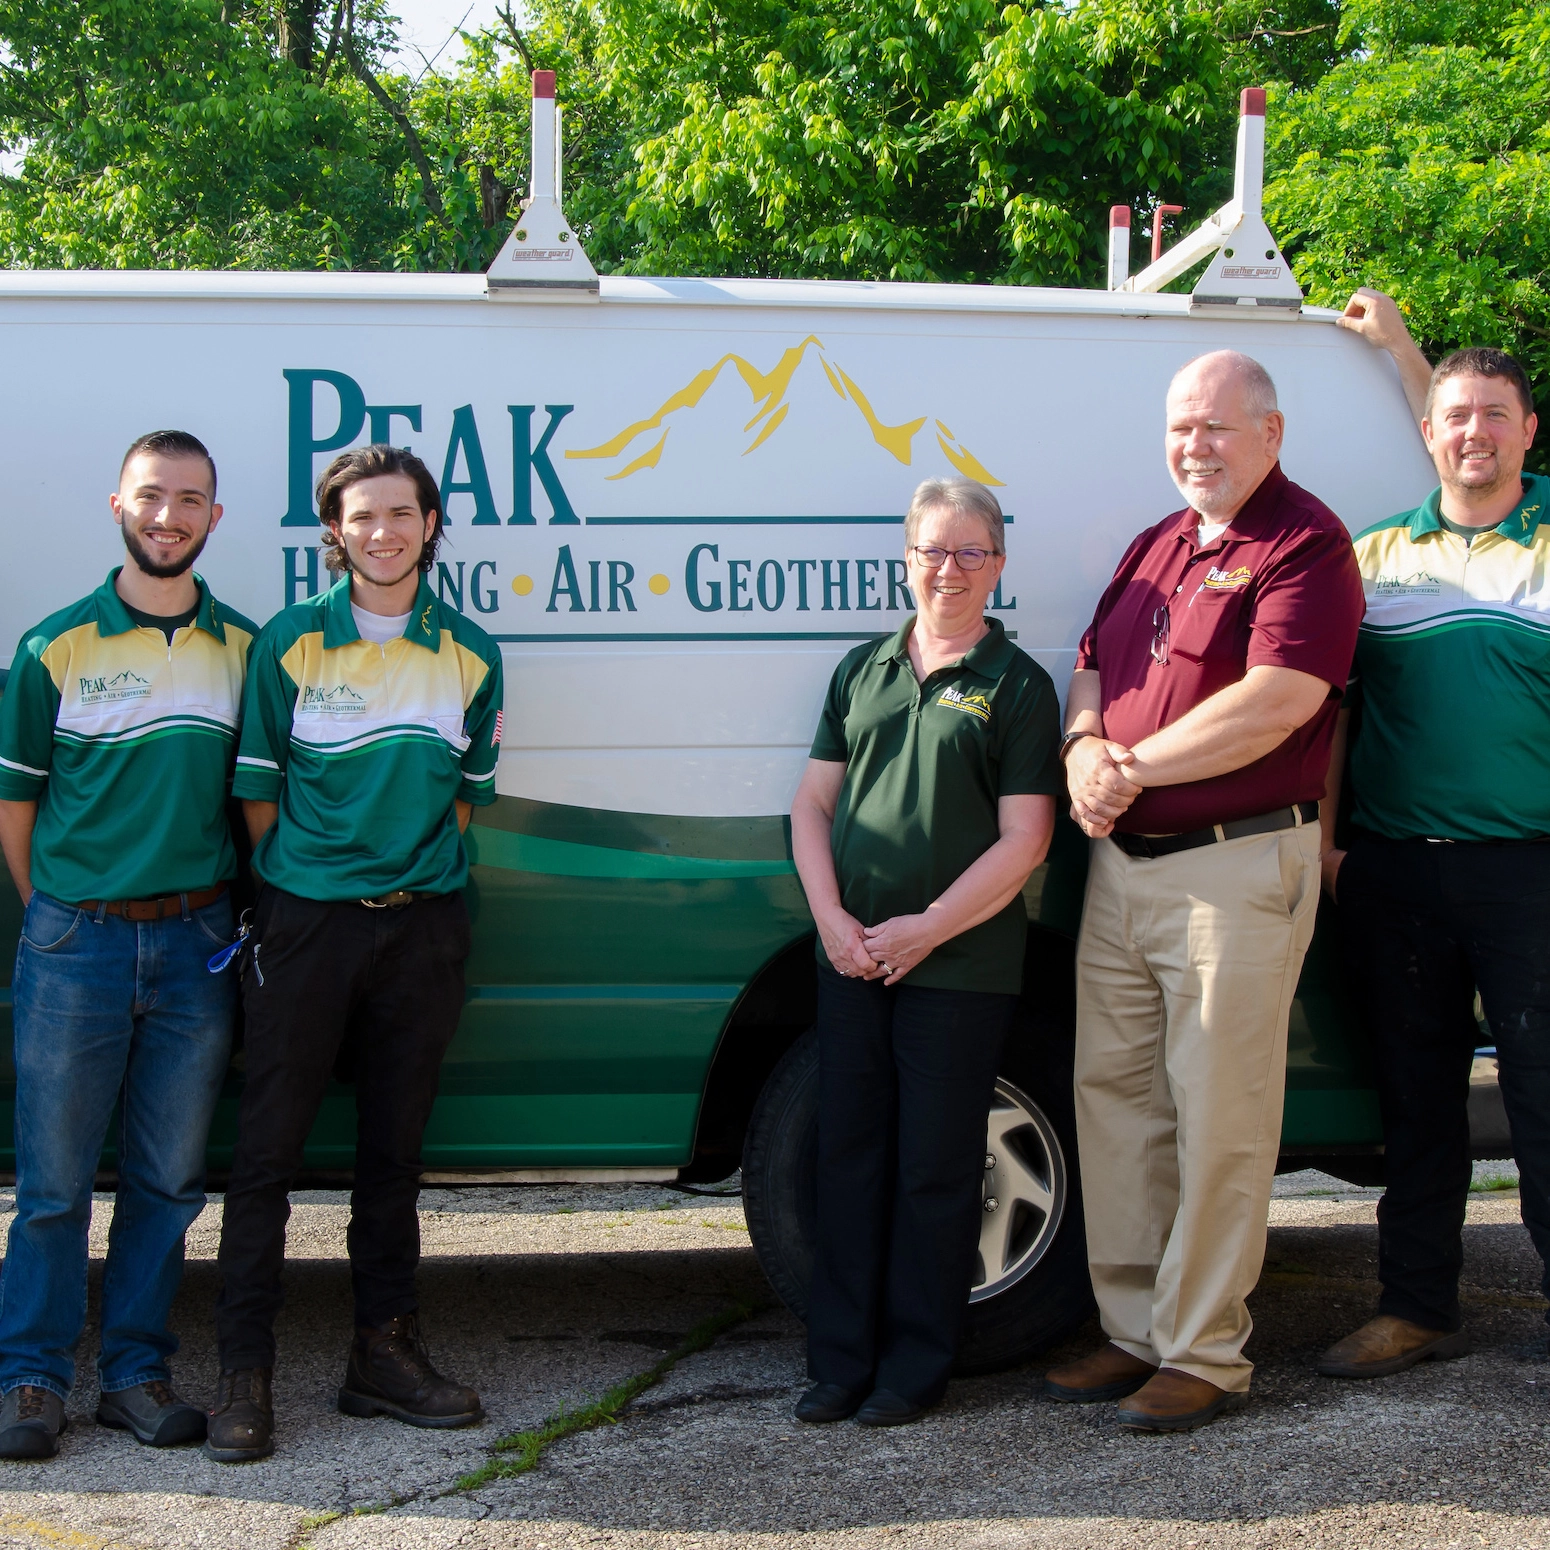 Get your Geothermal replacement done by Peak Heating and Air in Cincinnati OH